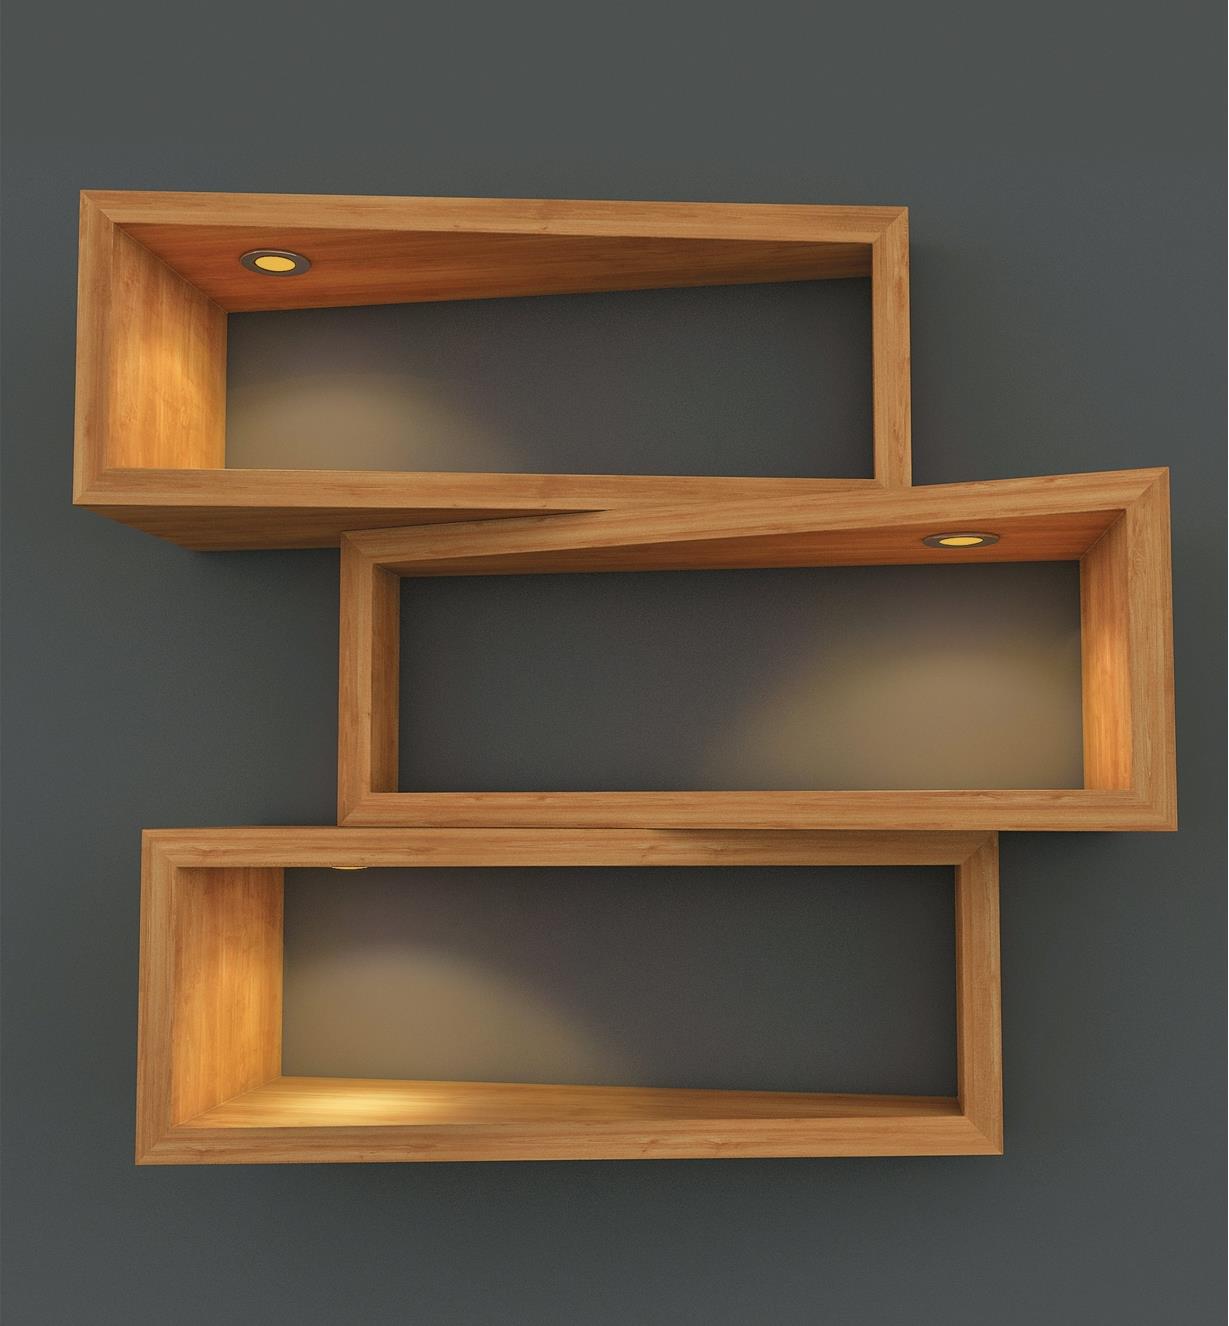 Example of mini recessed LED lights installed in floating shelves